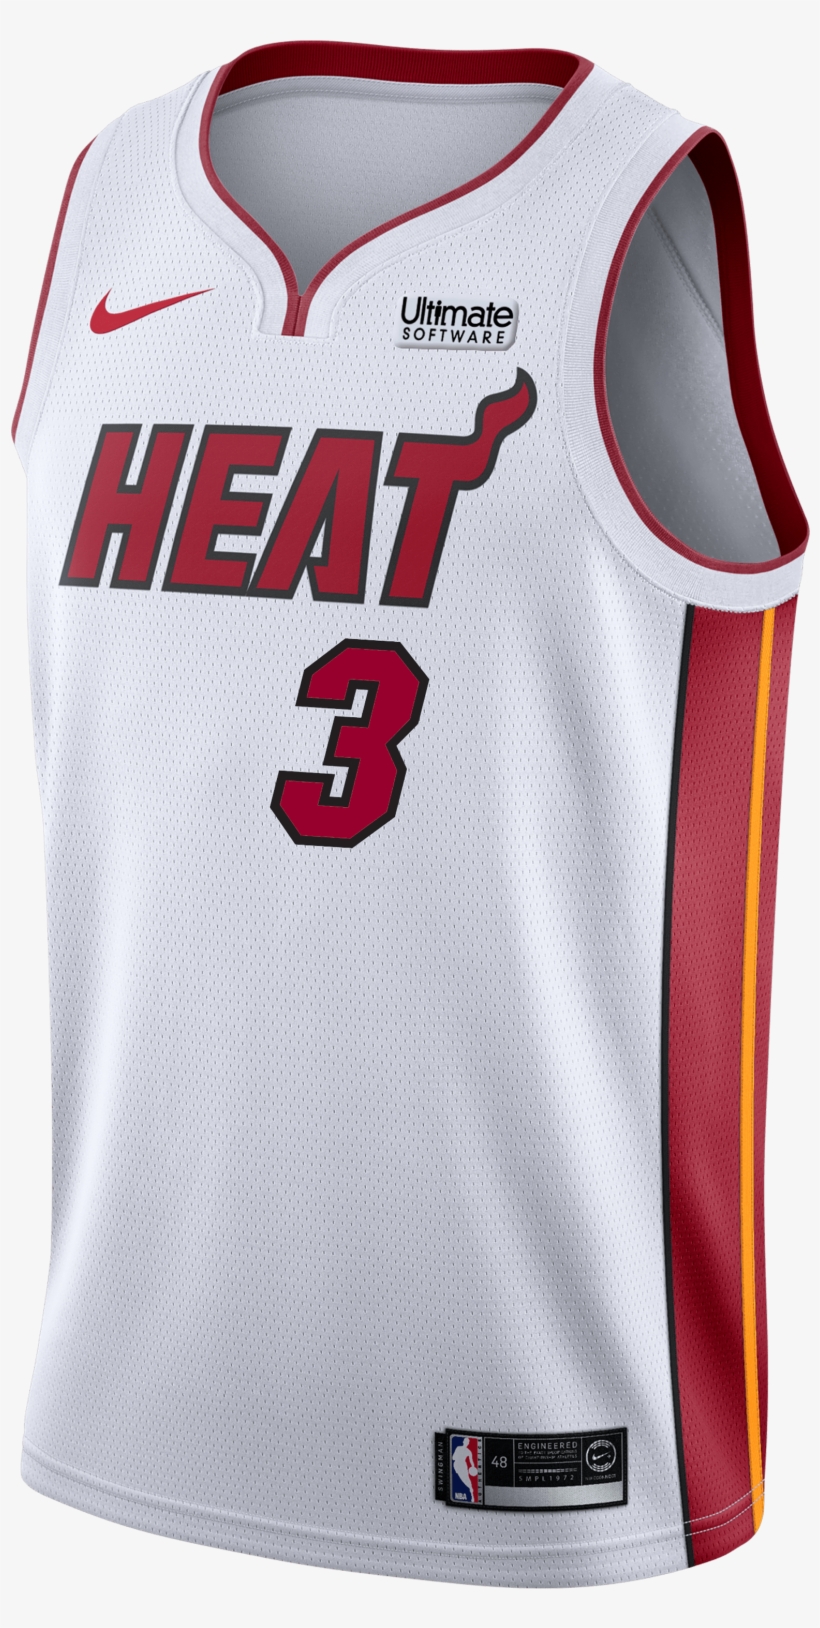 Miami Heat Jersey White, transparent png #1411679